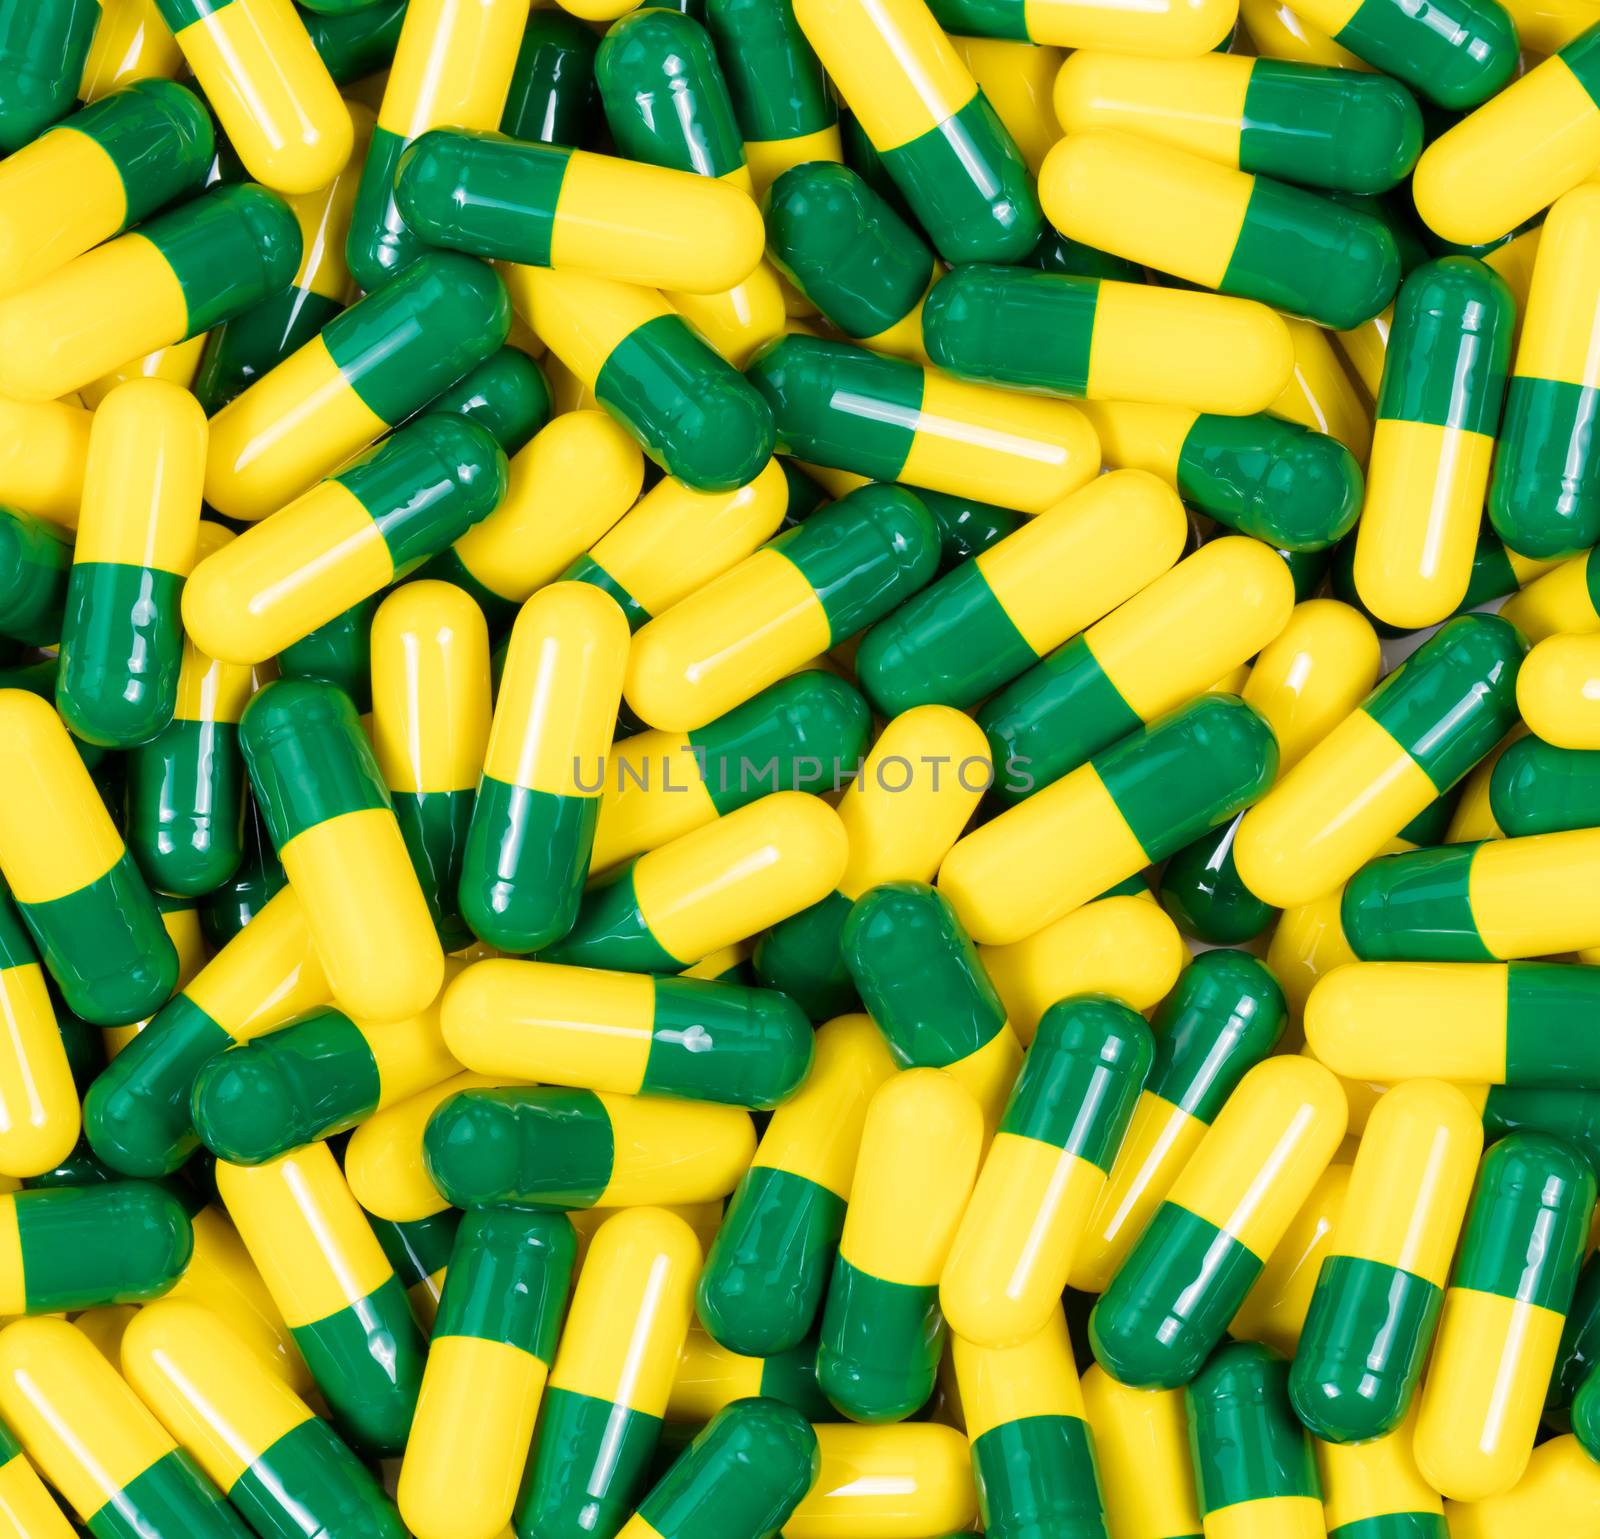 Medication capsules in green and yellow colors by tab1962